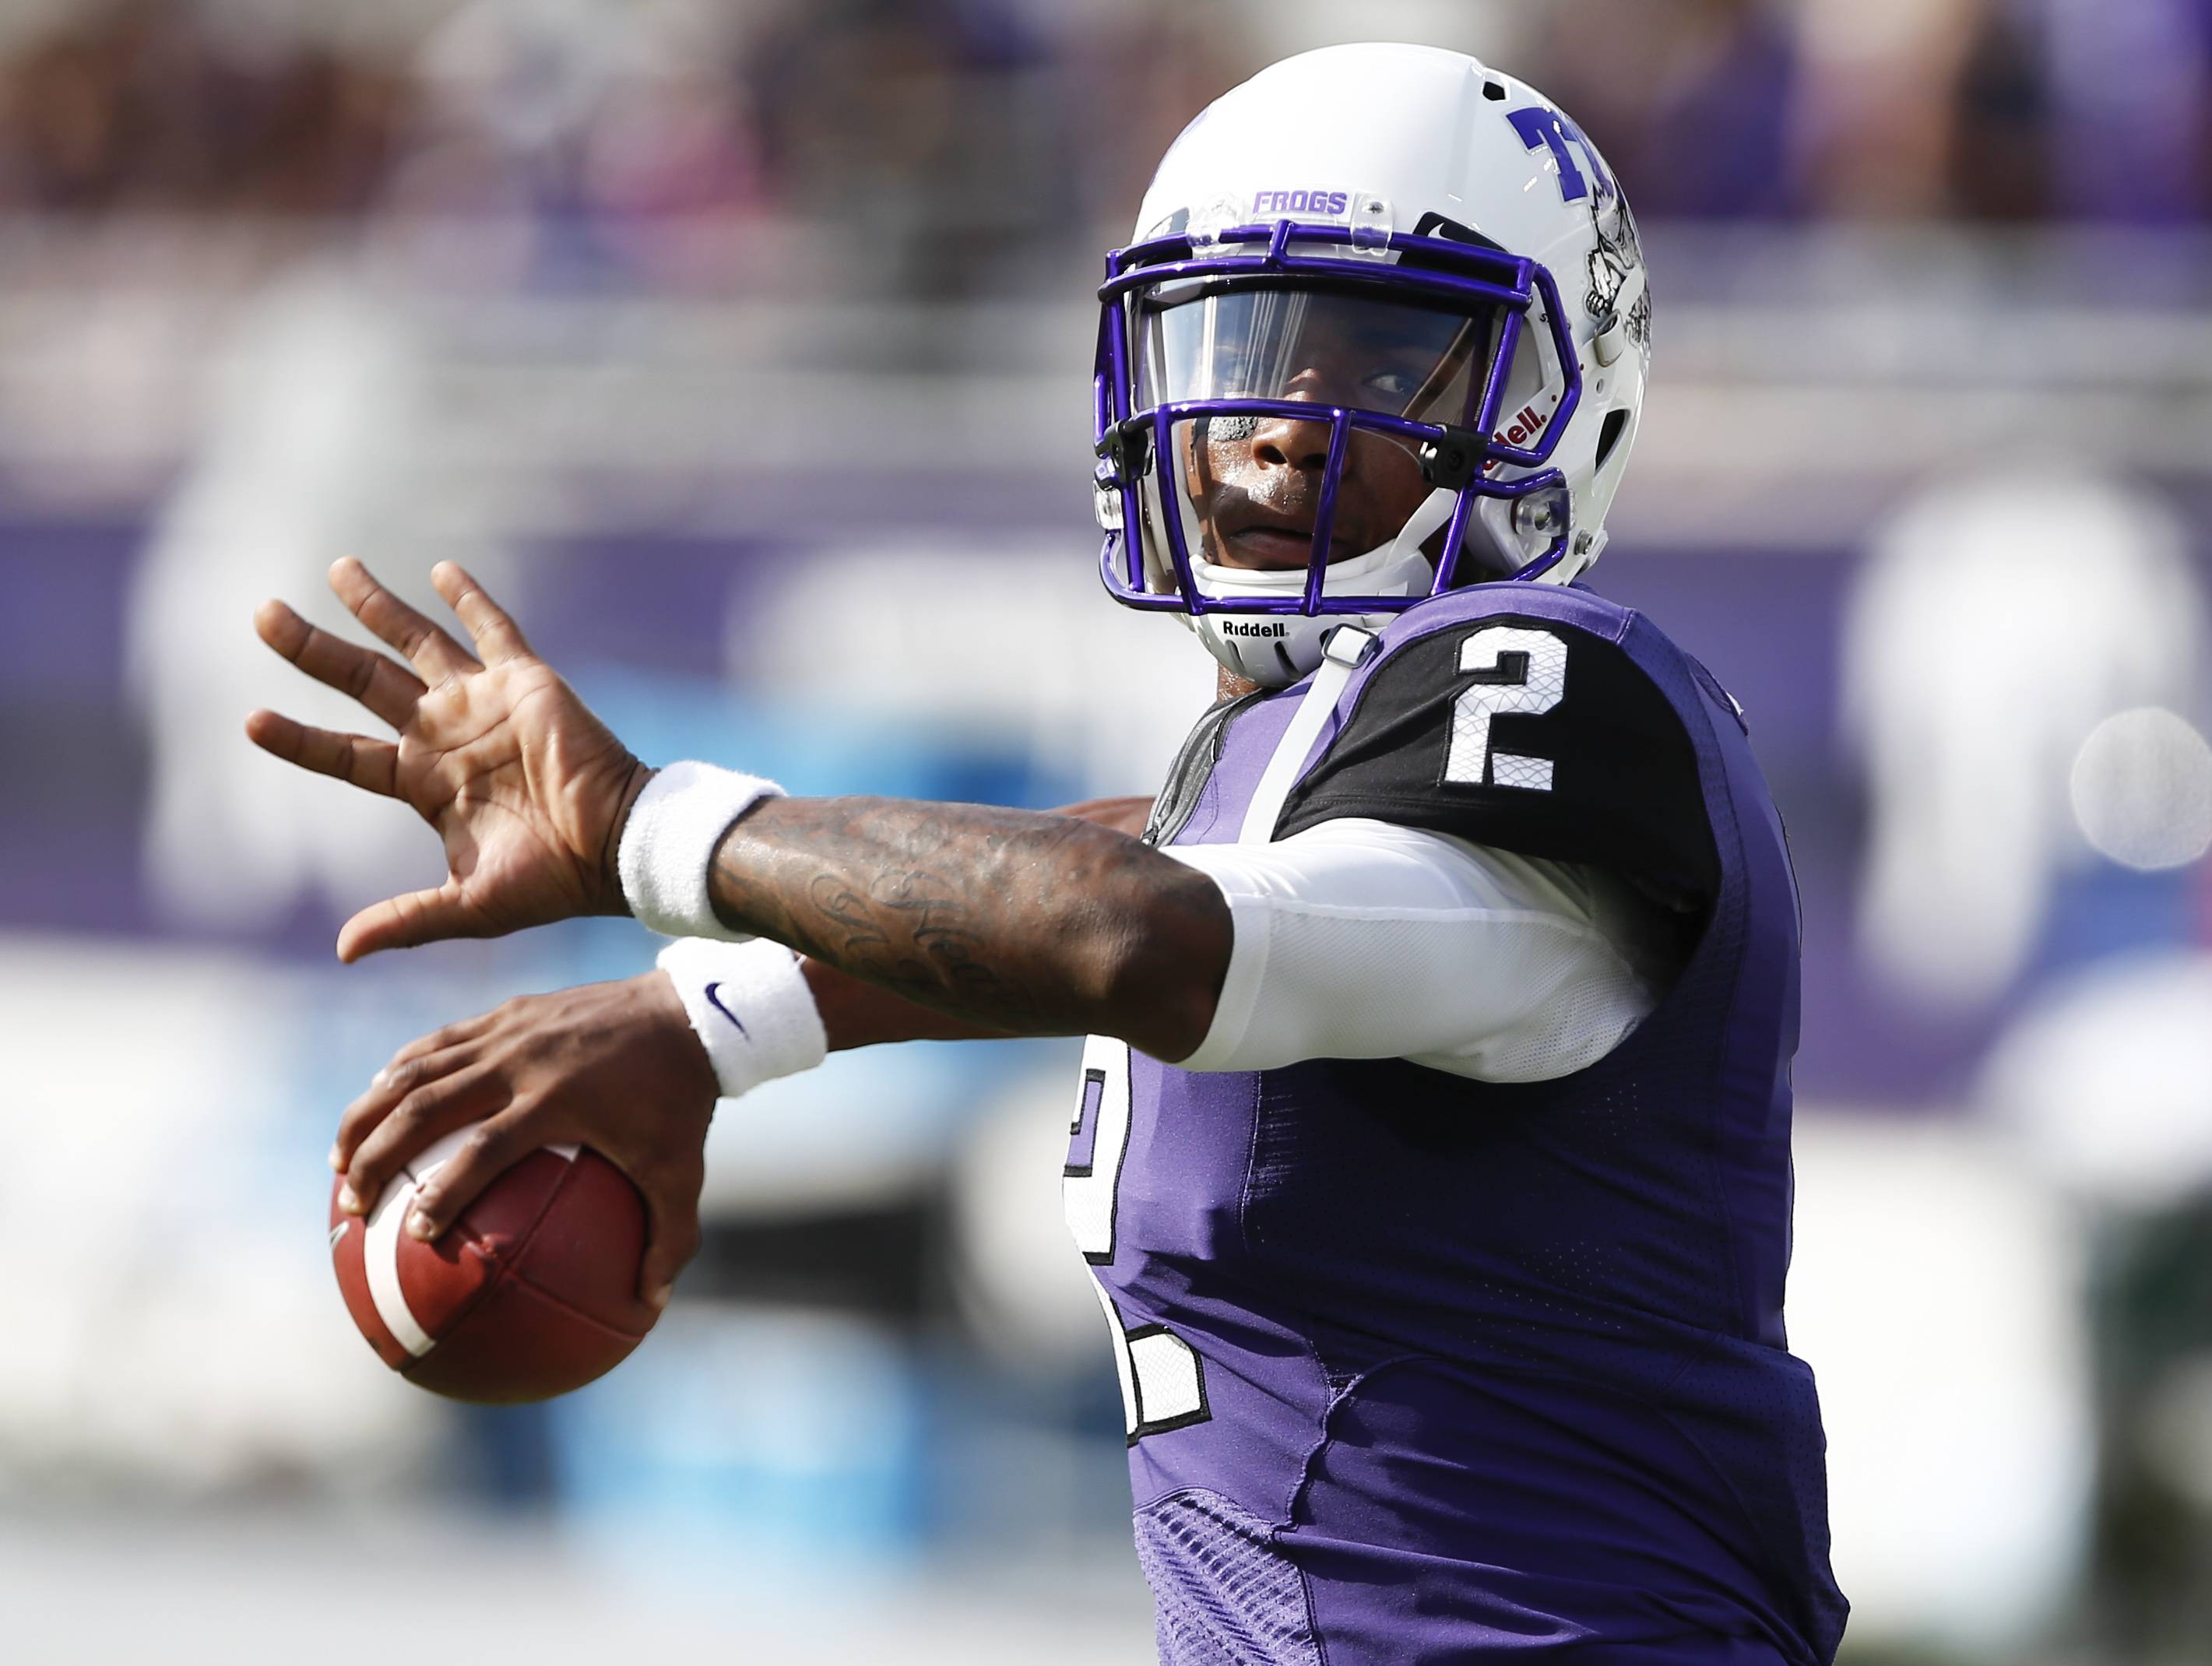 Trevone Boykin Answers Tcu S Biggest Question In Dominant Performance